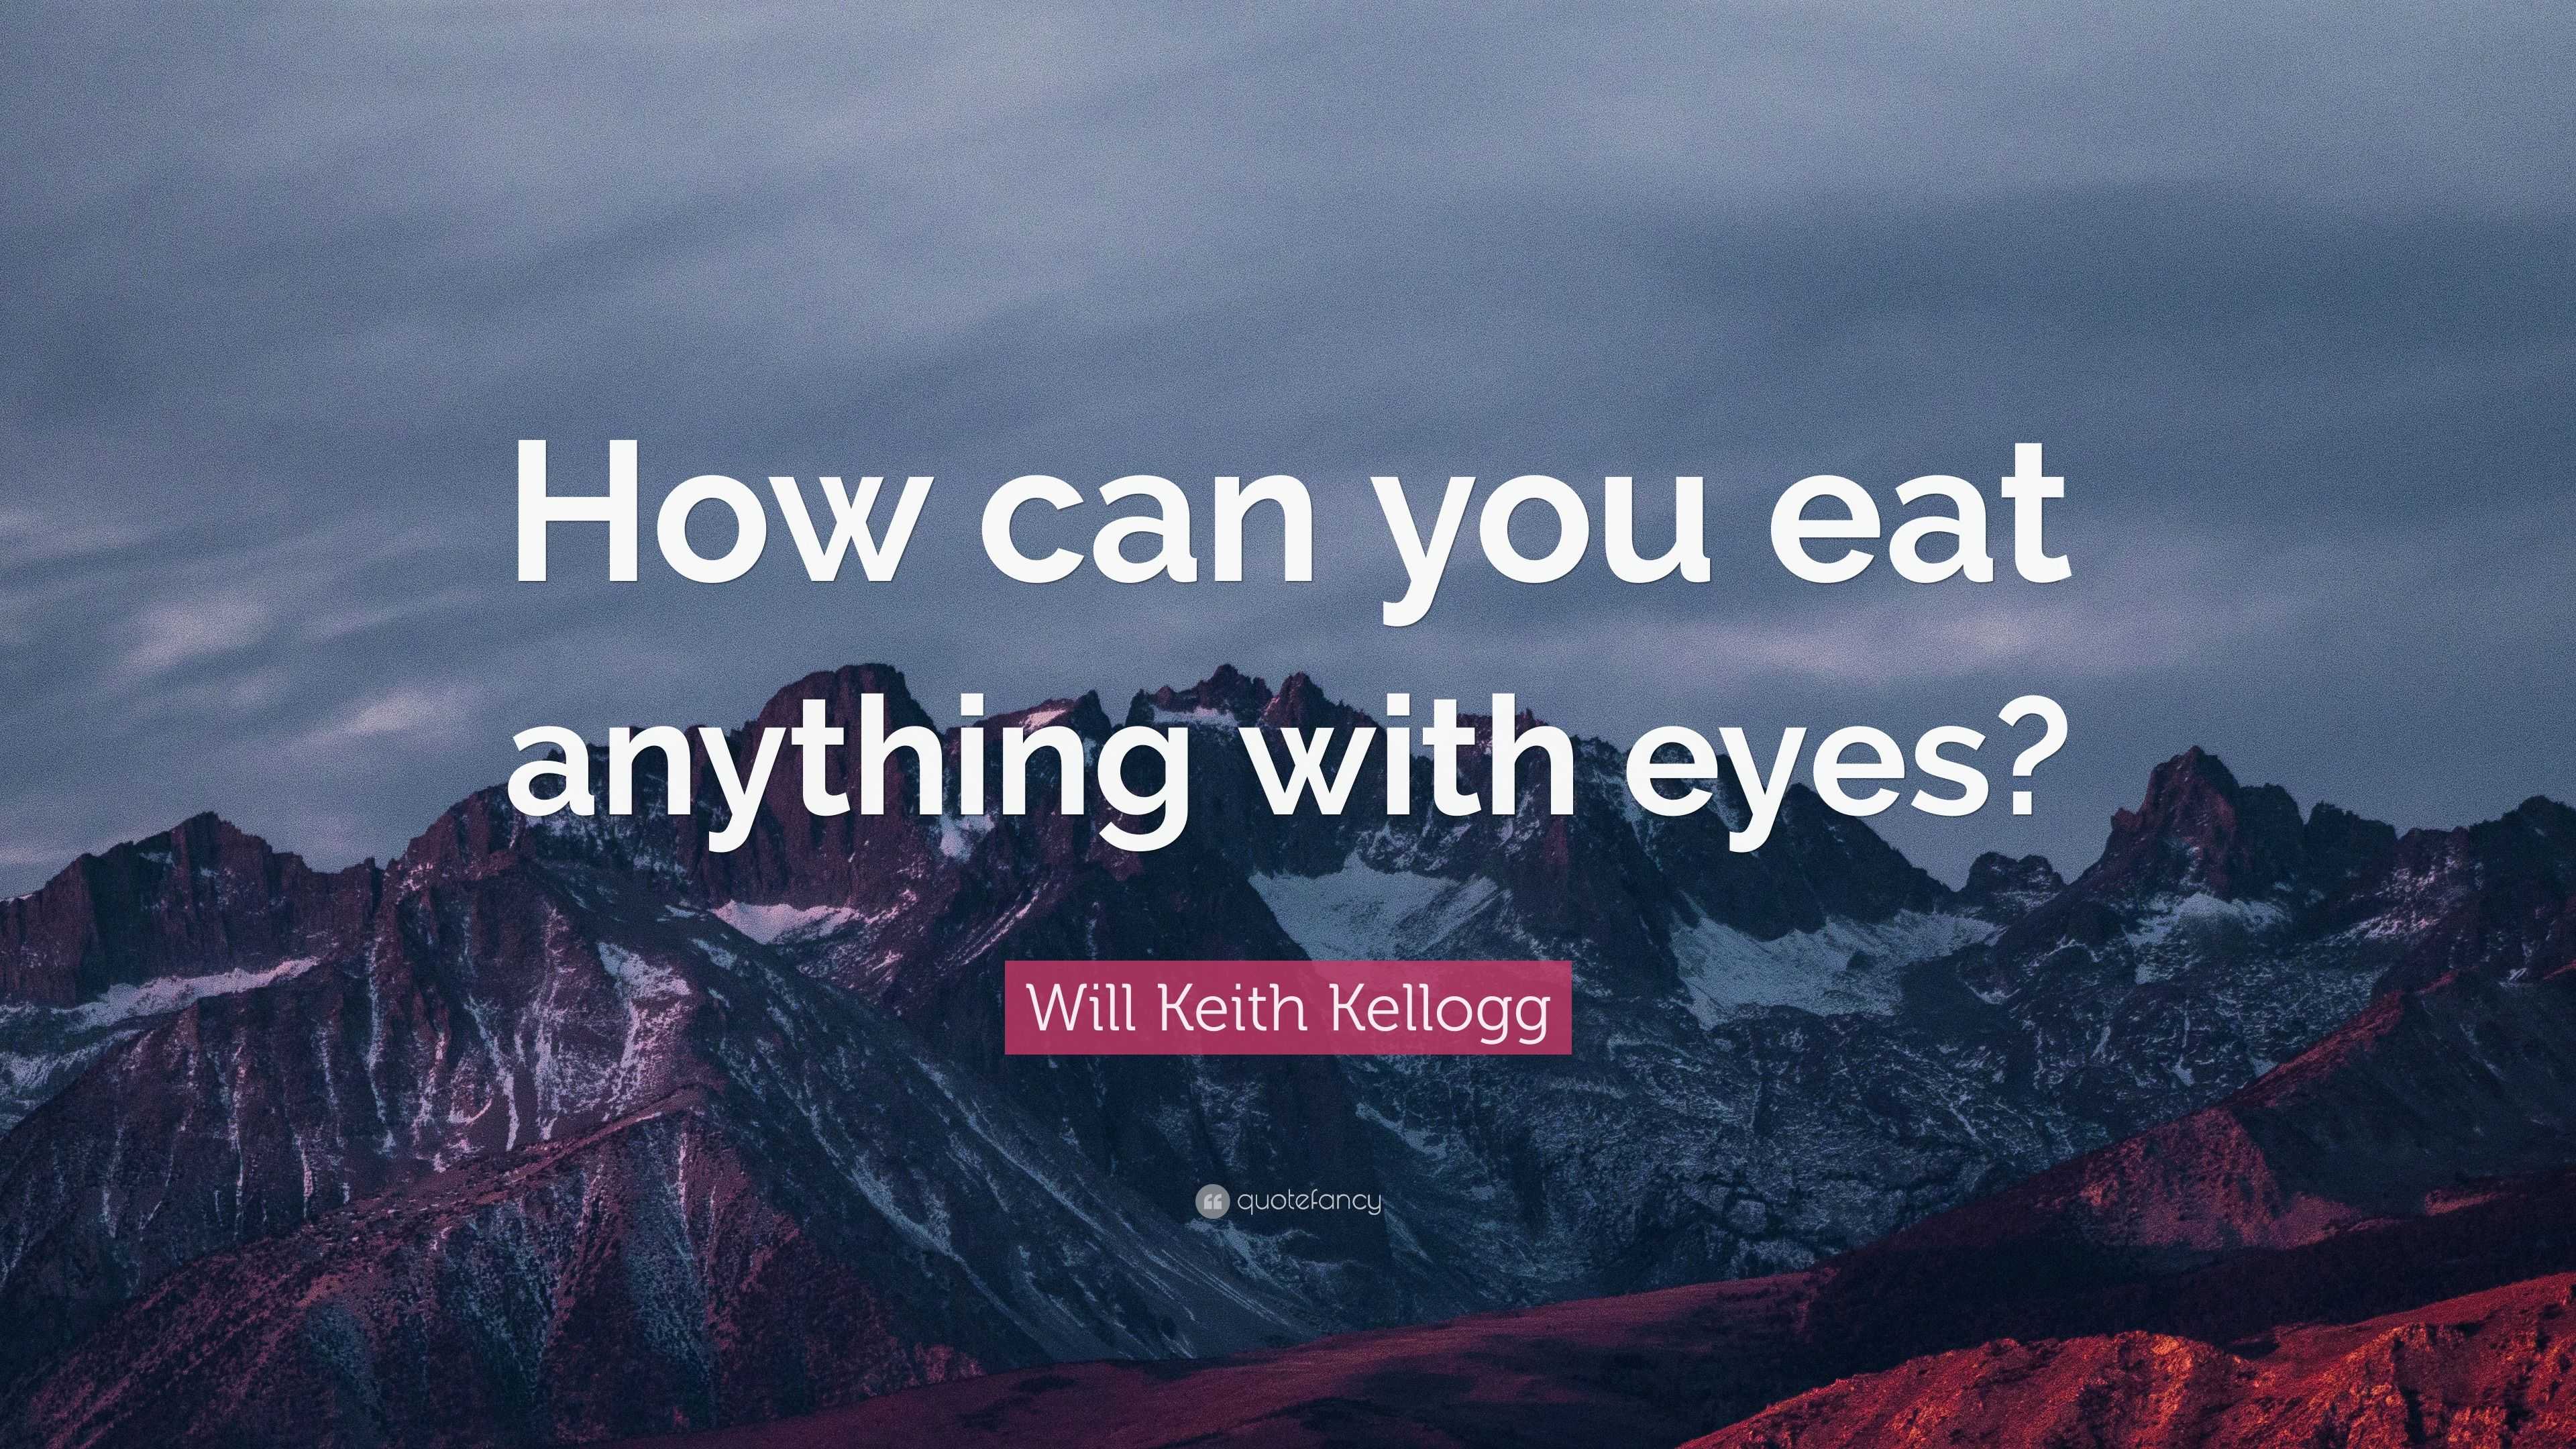 Will Keith Kellogg Quote: “How can you eat anything with eyes?”